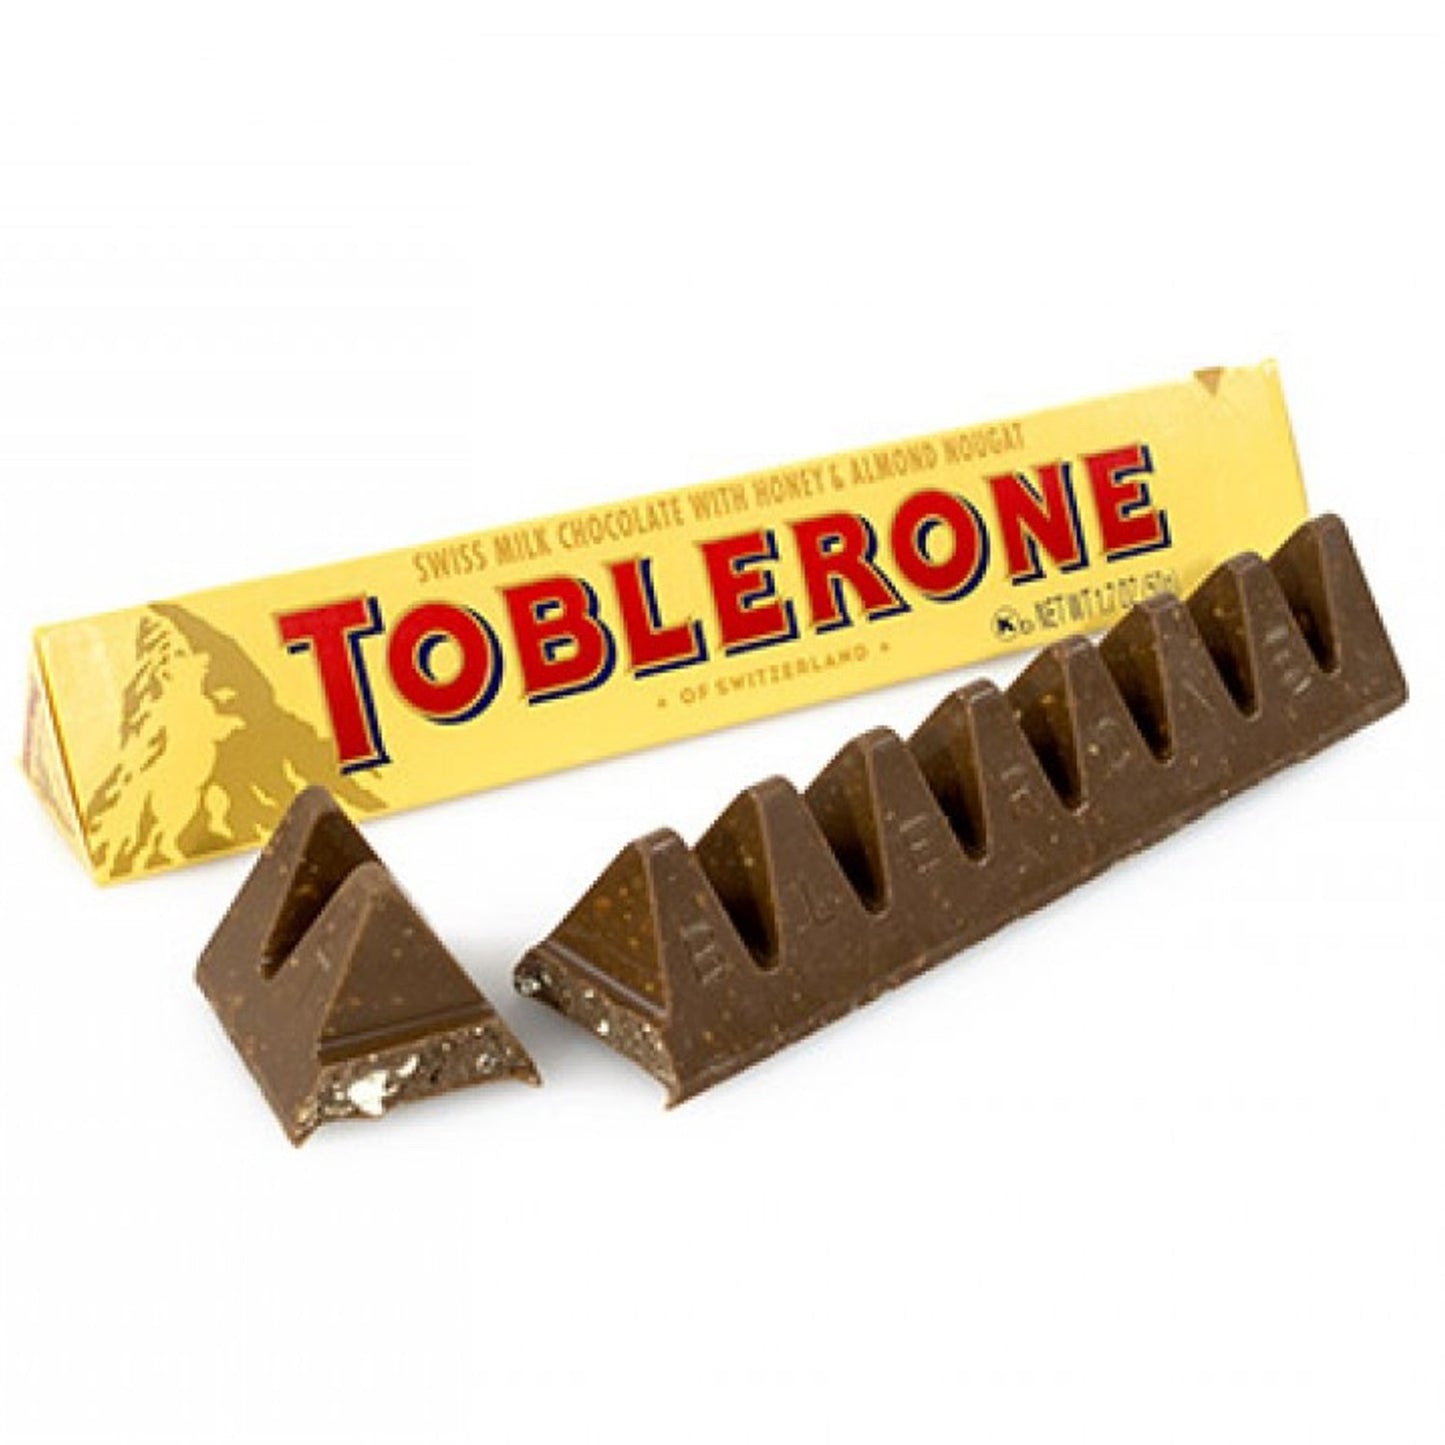 Toblerone Swiss Milk Chocolate with Honey and Almond Nougat 100g ea Bars 6-Pack